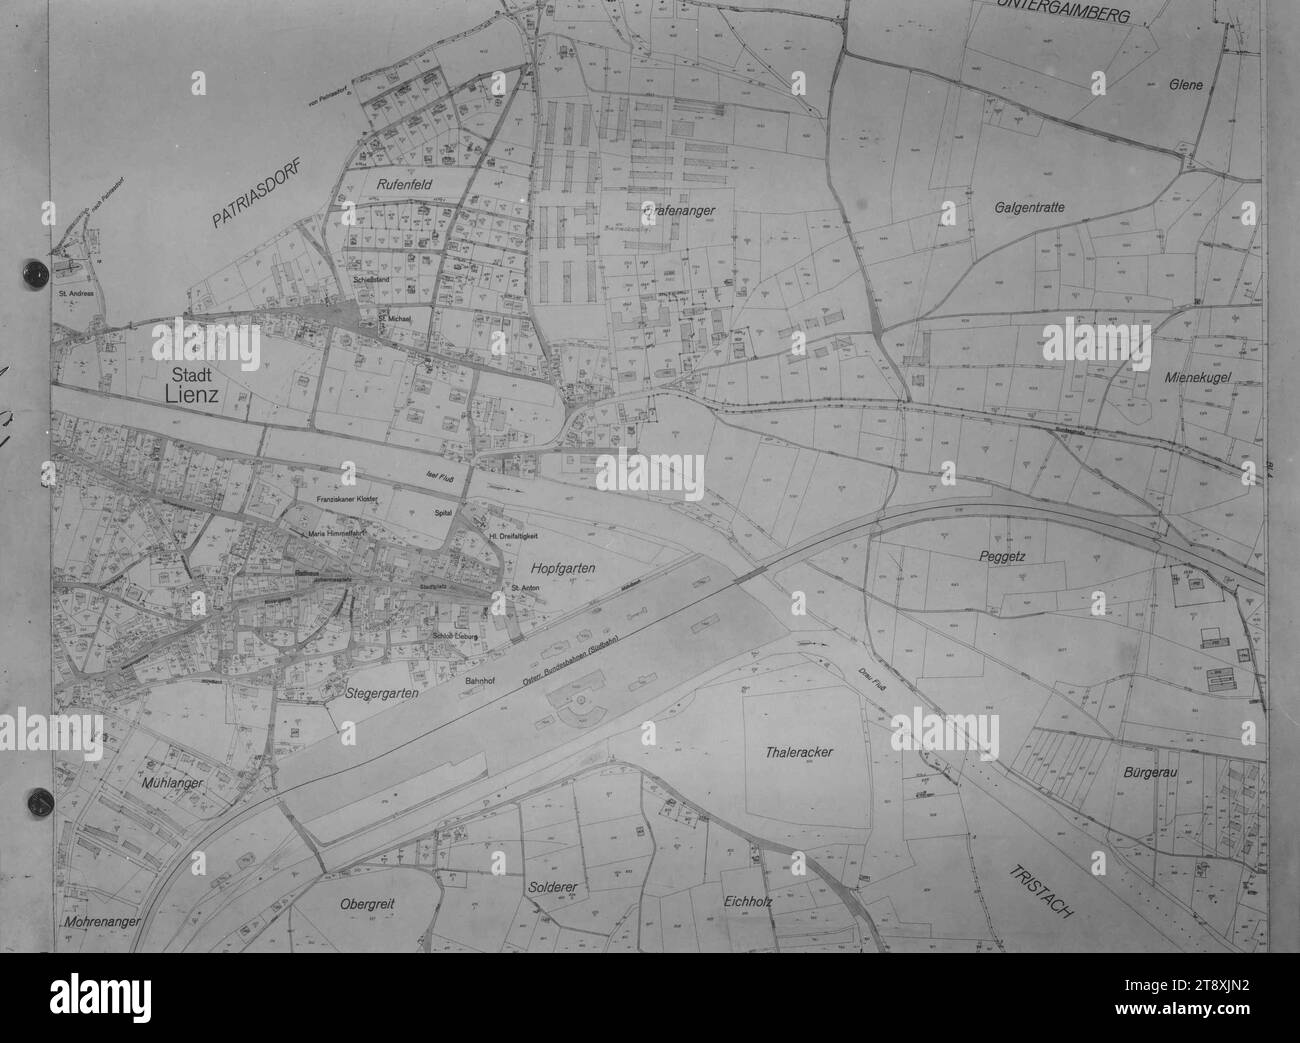 Cadastral map of Lienz (East Tyrol), Martin Gerlach jun. (1879-1944), photographer, dated around 1938-1940, glass, negative, height 17.8 cm, width 23.8 cm, town planning and urban development, town plans, The Vienna Collection Stock Photo